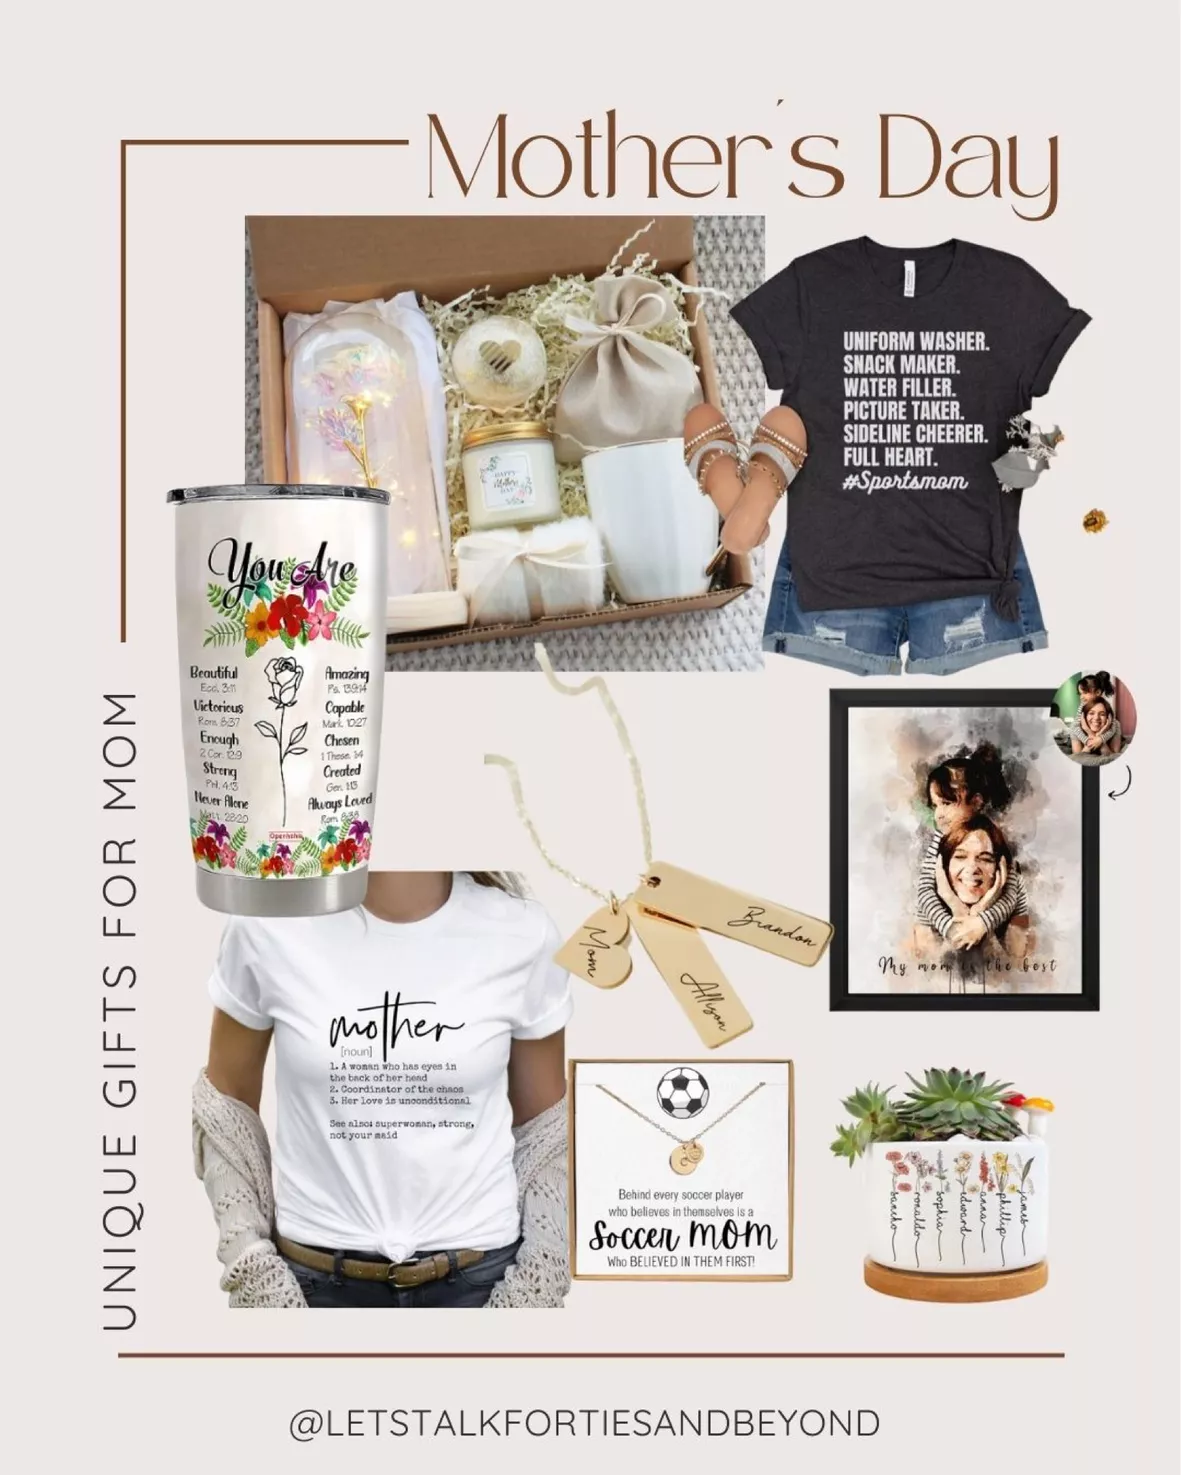 The Best Gifts for Moms to Buy in the PH This Mother's Day